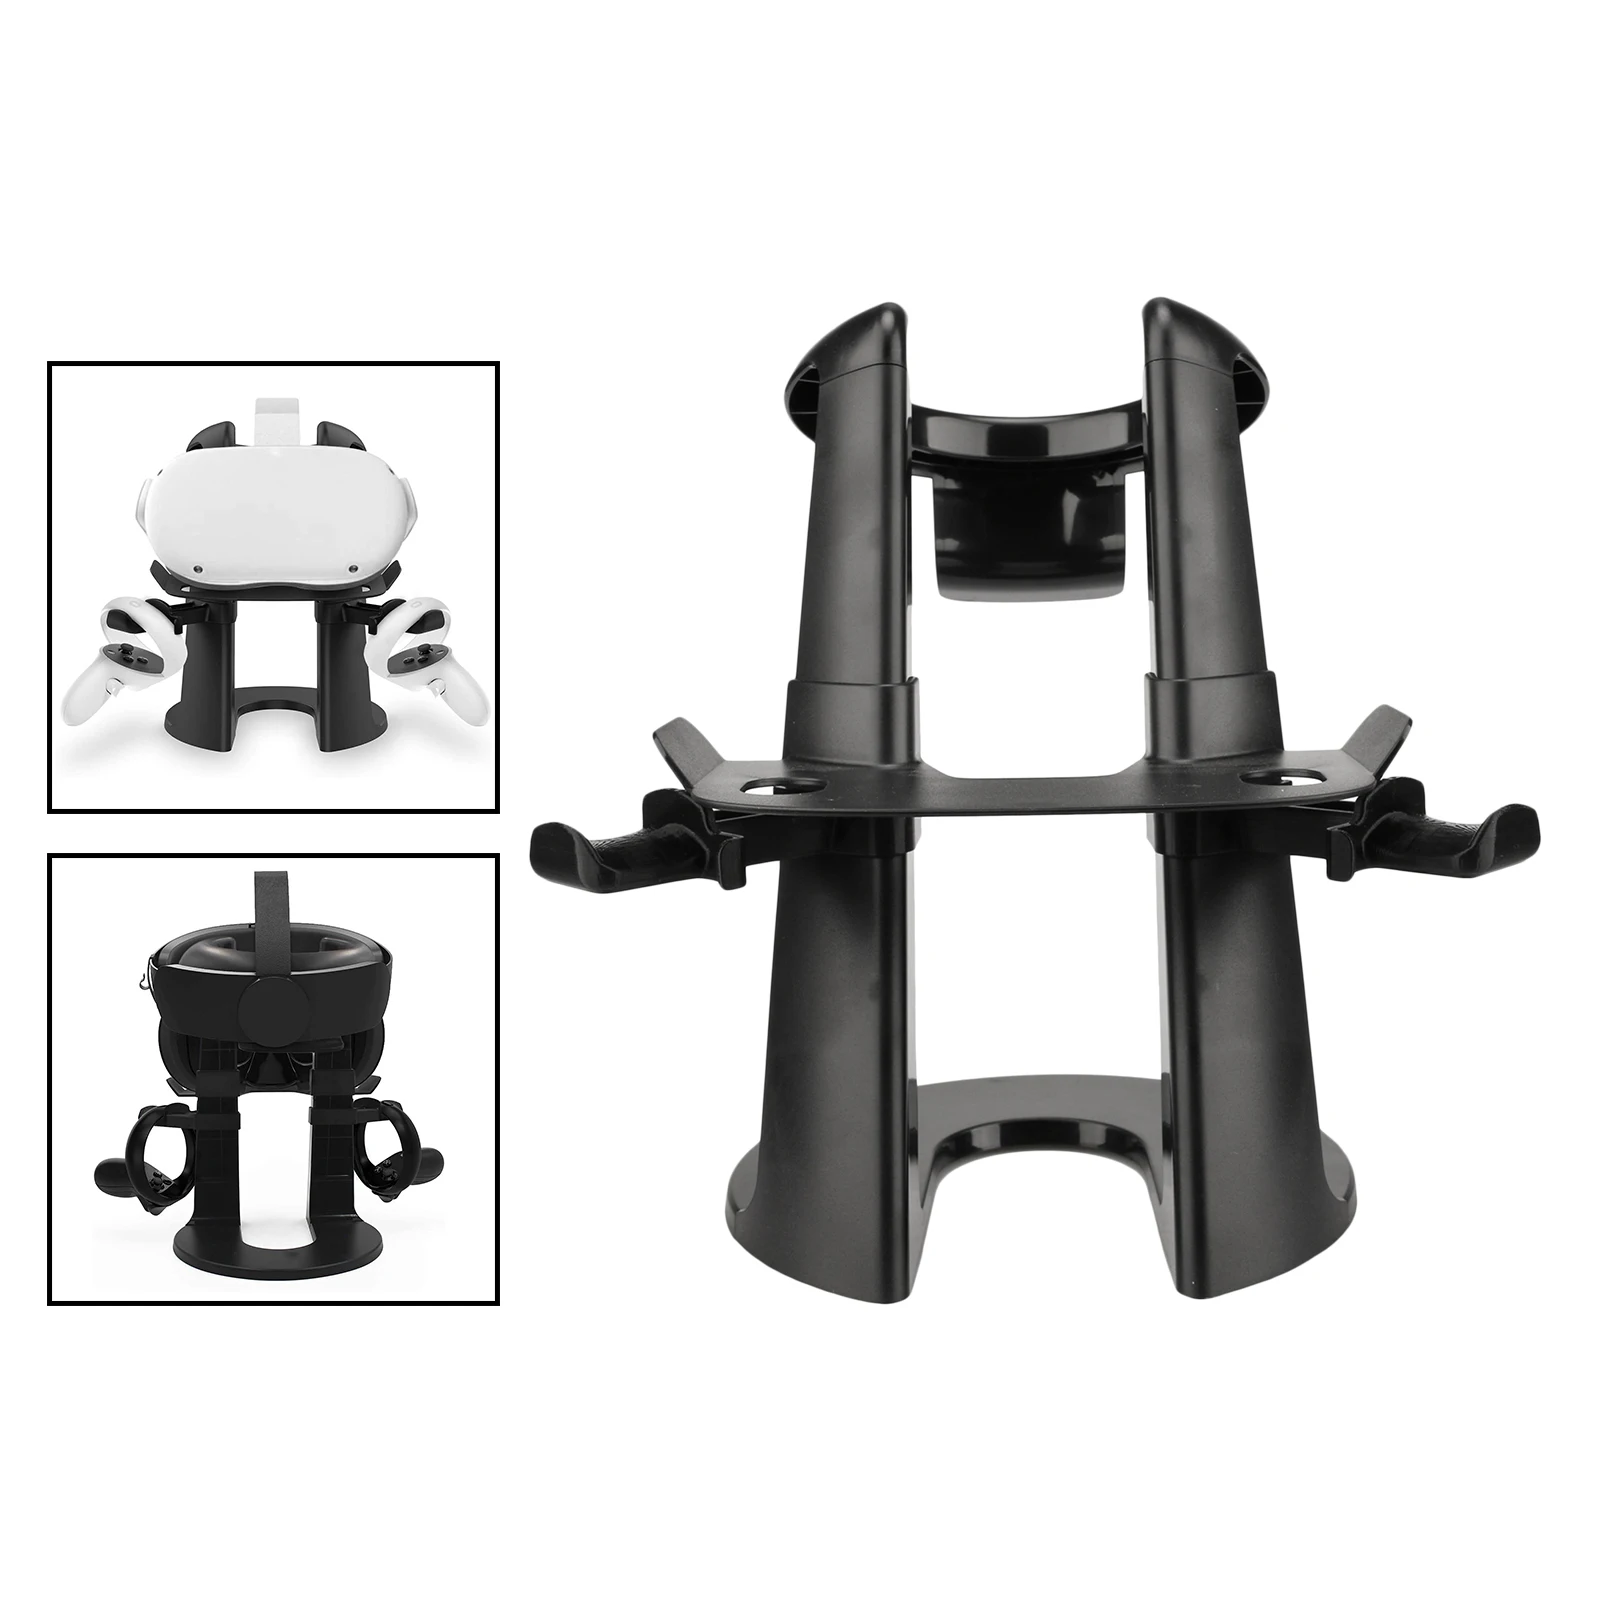 VR Stand Headset Display Holder Mount Station for  Rift S Quest 2 Stable Base